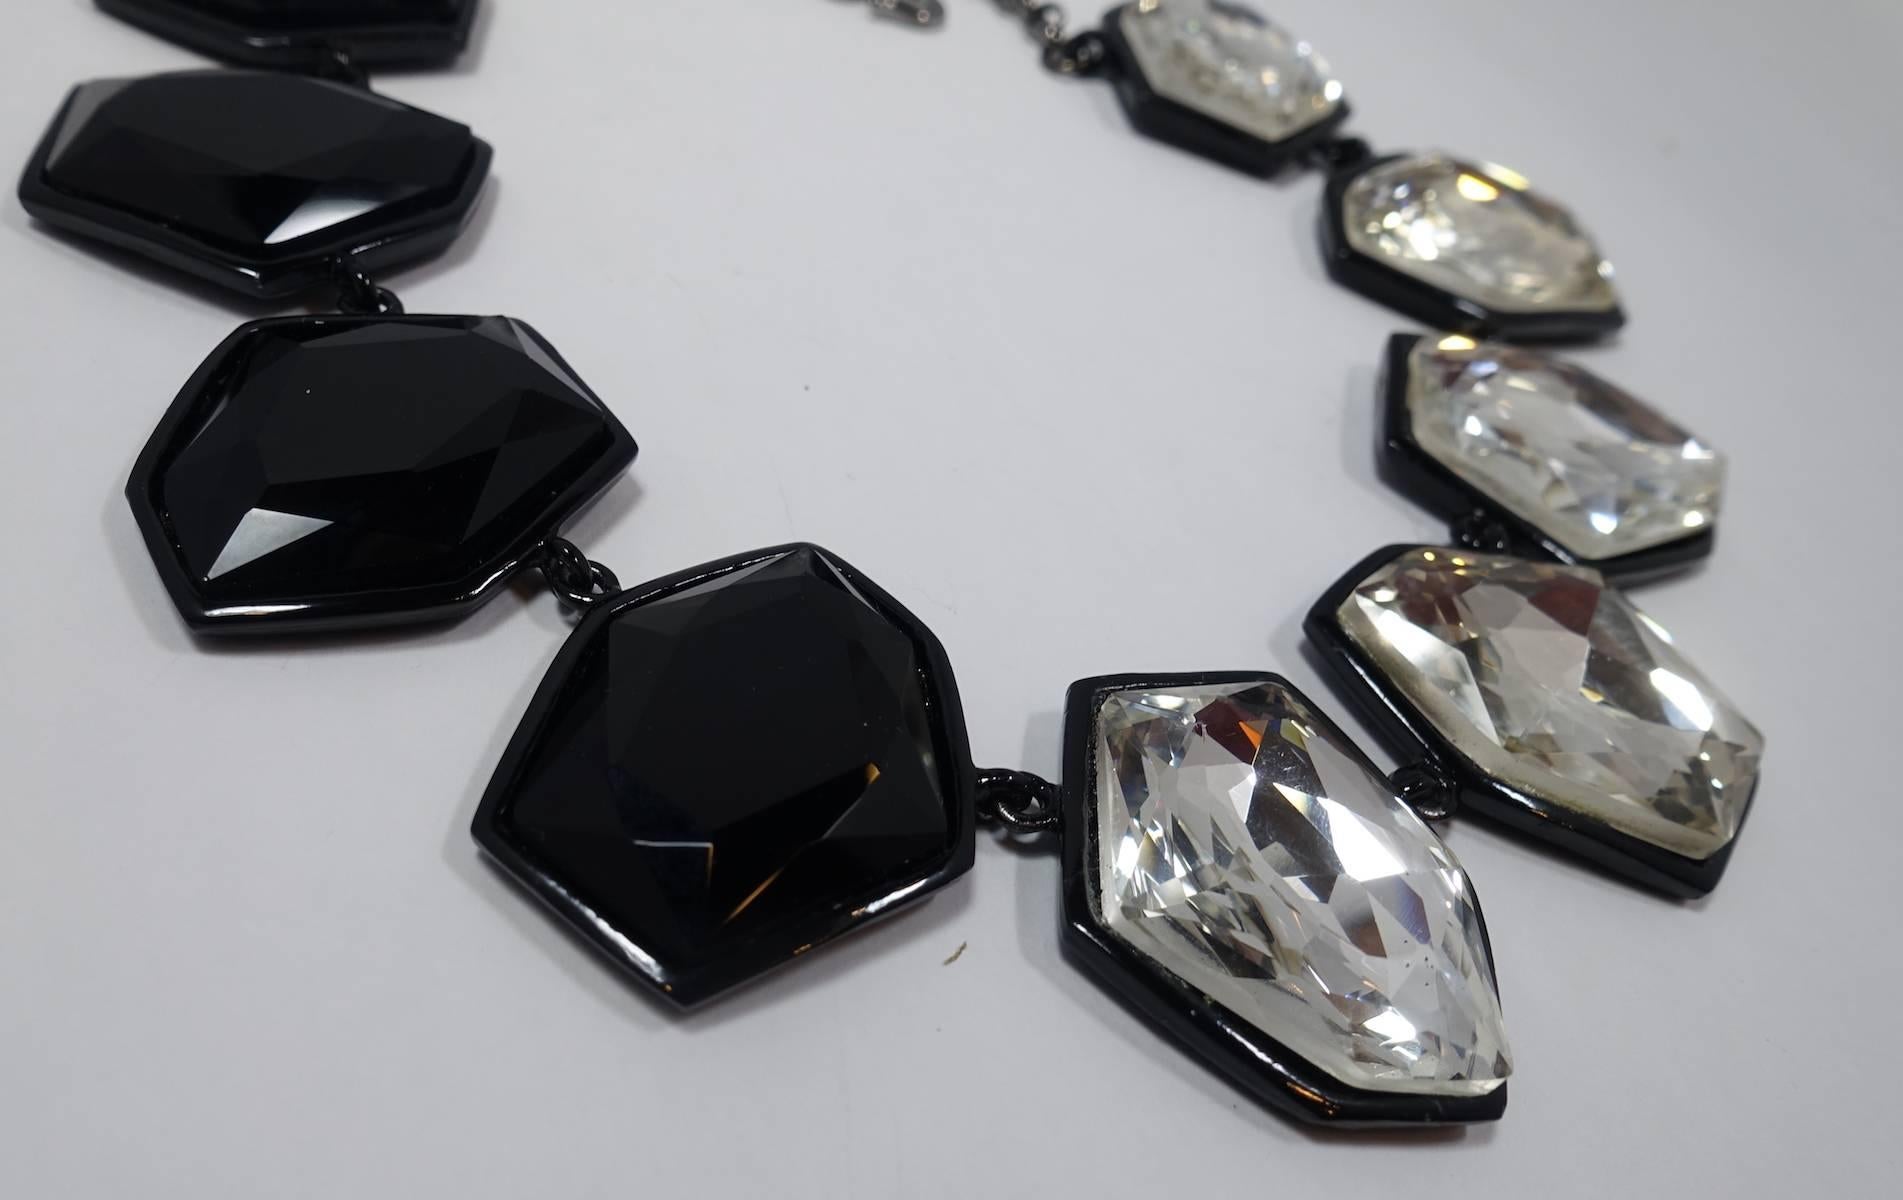 This Kenneth Lane necklace features faceted clear and black “headlight” crystals in a Japanned setting. This necklace measures 21” long with a hook closure x 1-7/8” and is signed “Kenneth Lane”.  This necklace is in excellent condition.